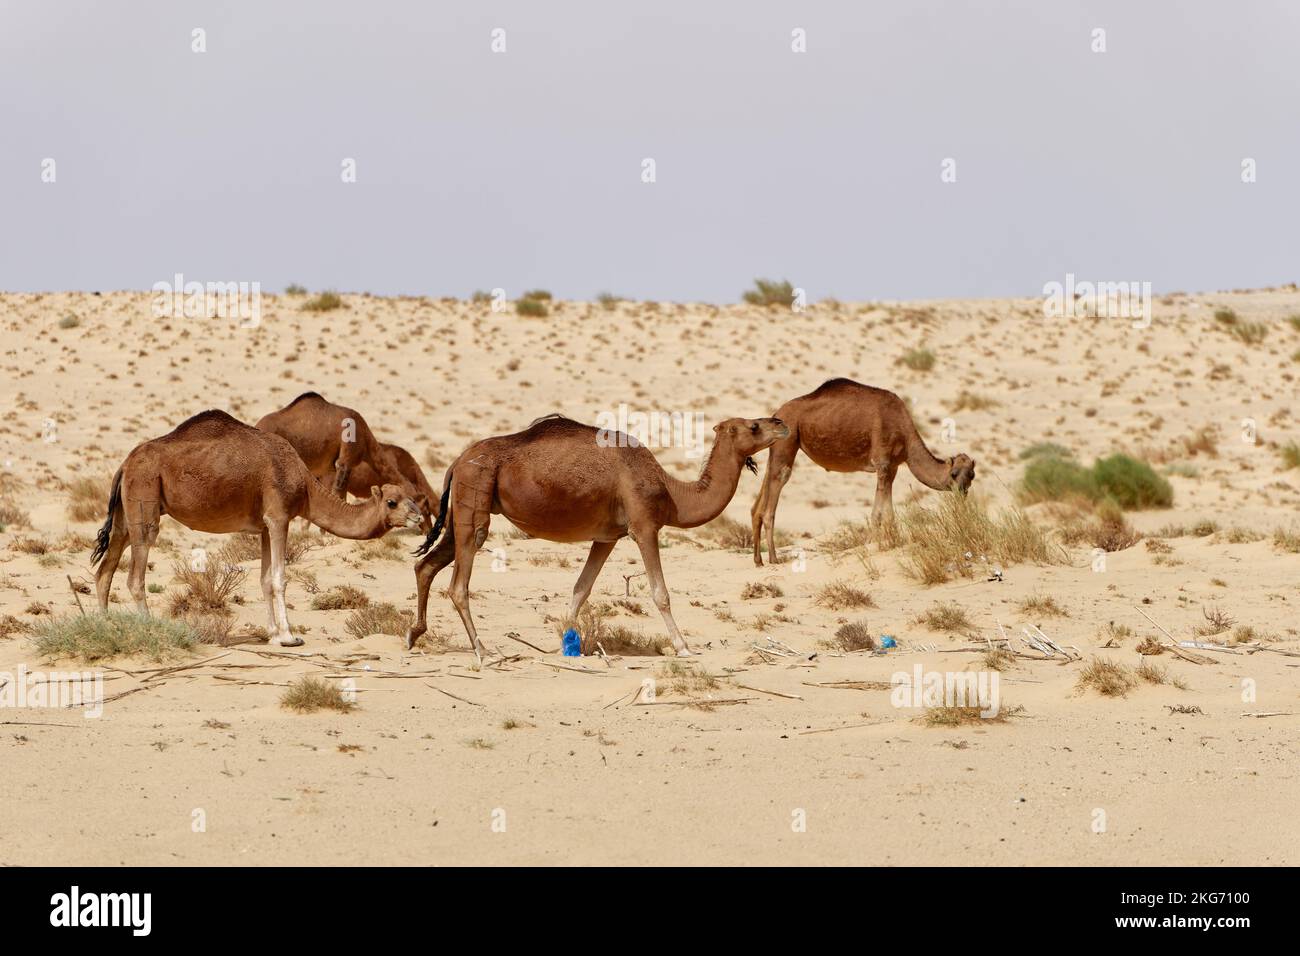 A group of camels in the desert. Wild animals in their natural habitat. Wilderness and arid landscapes. Travel and tourism destination in the desert. Stock Photo